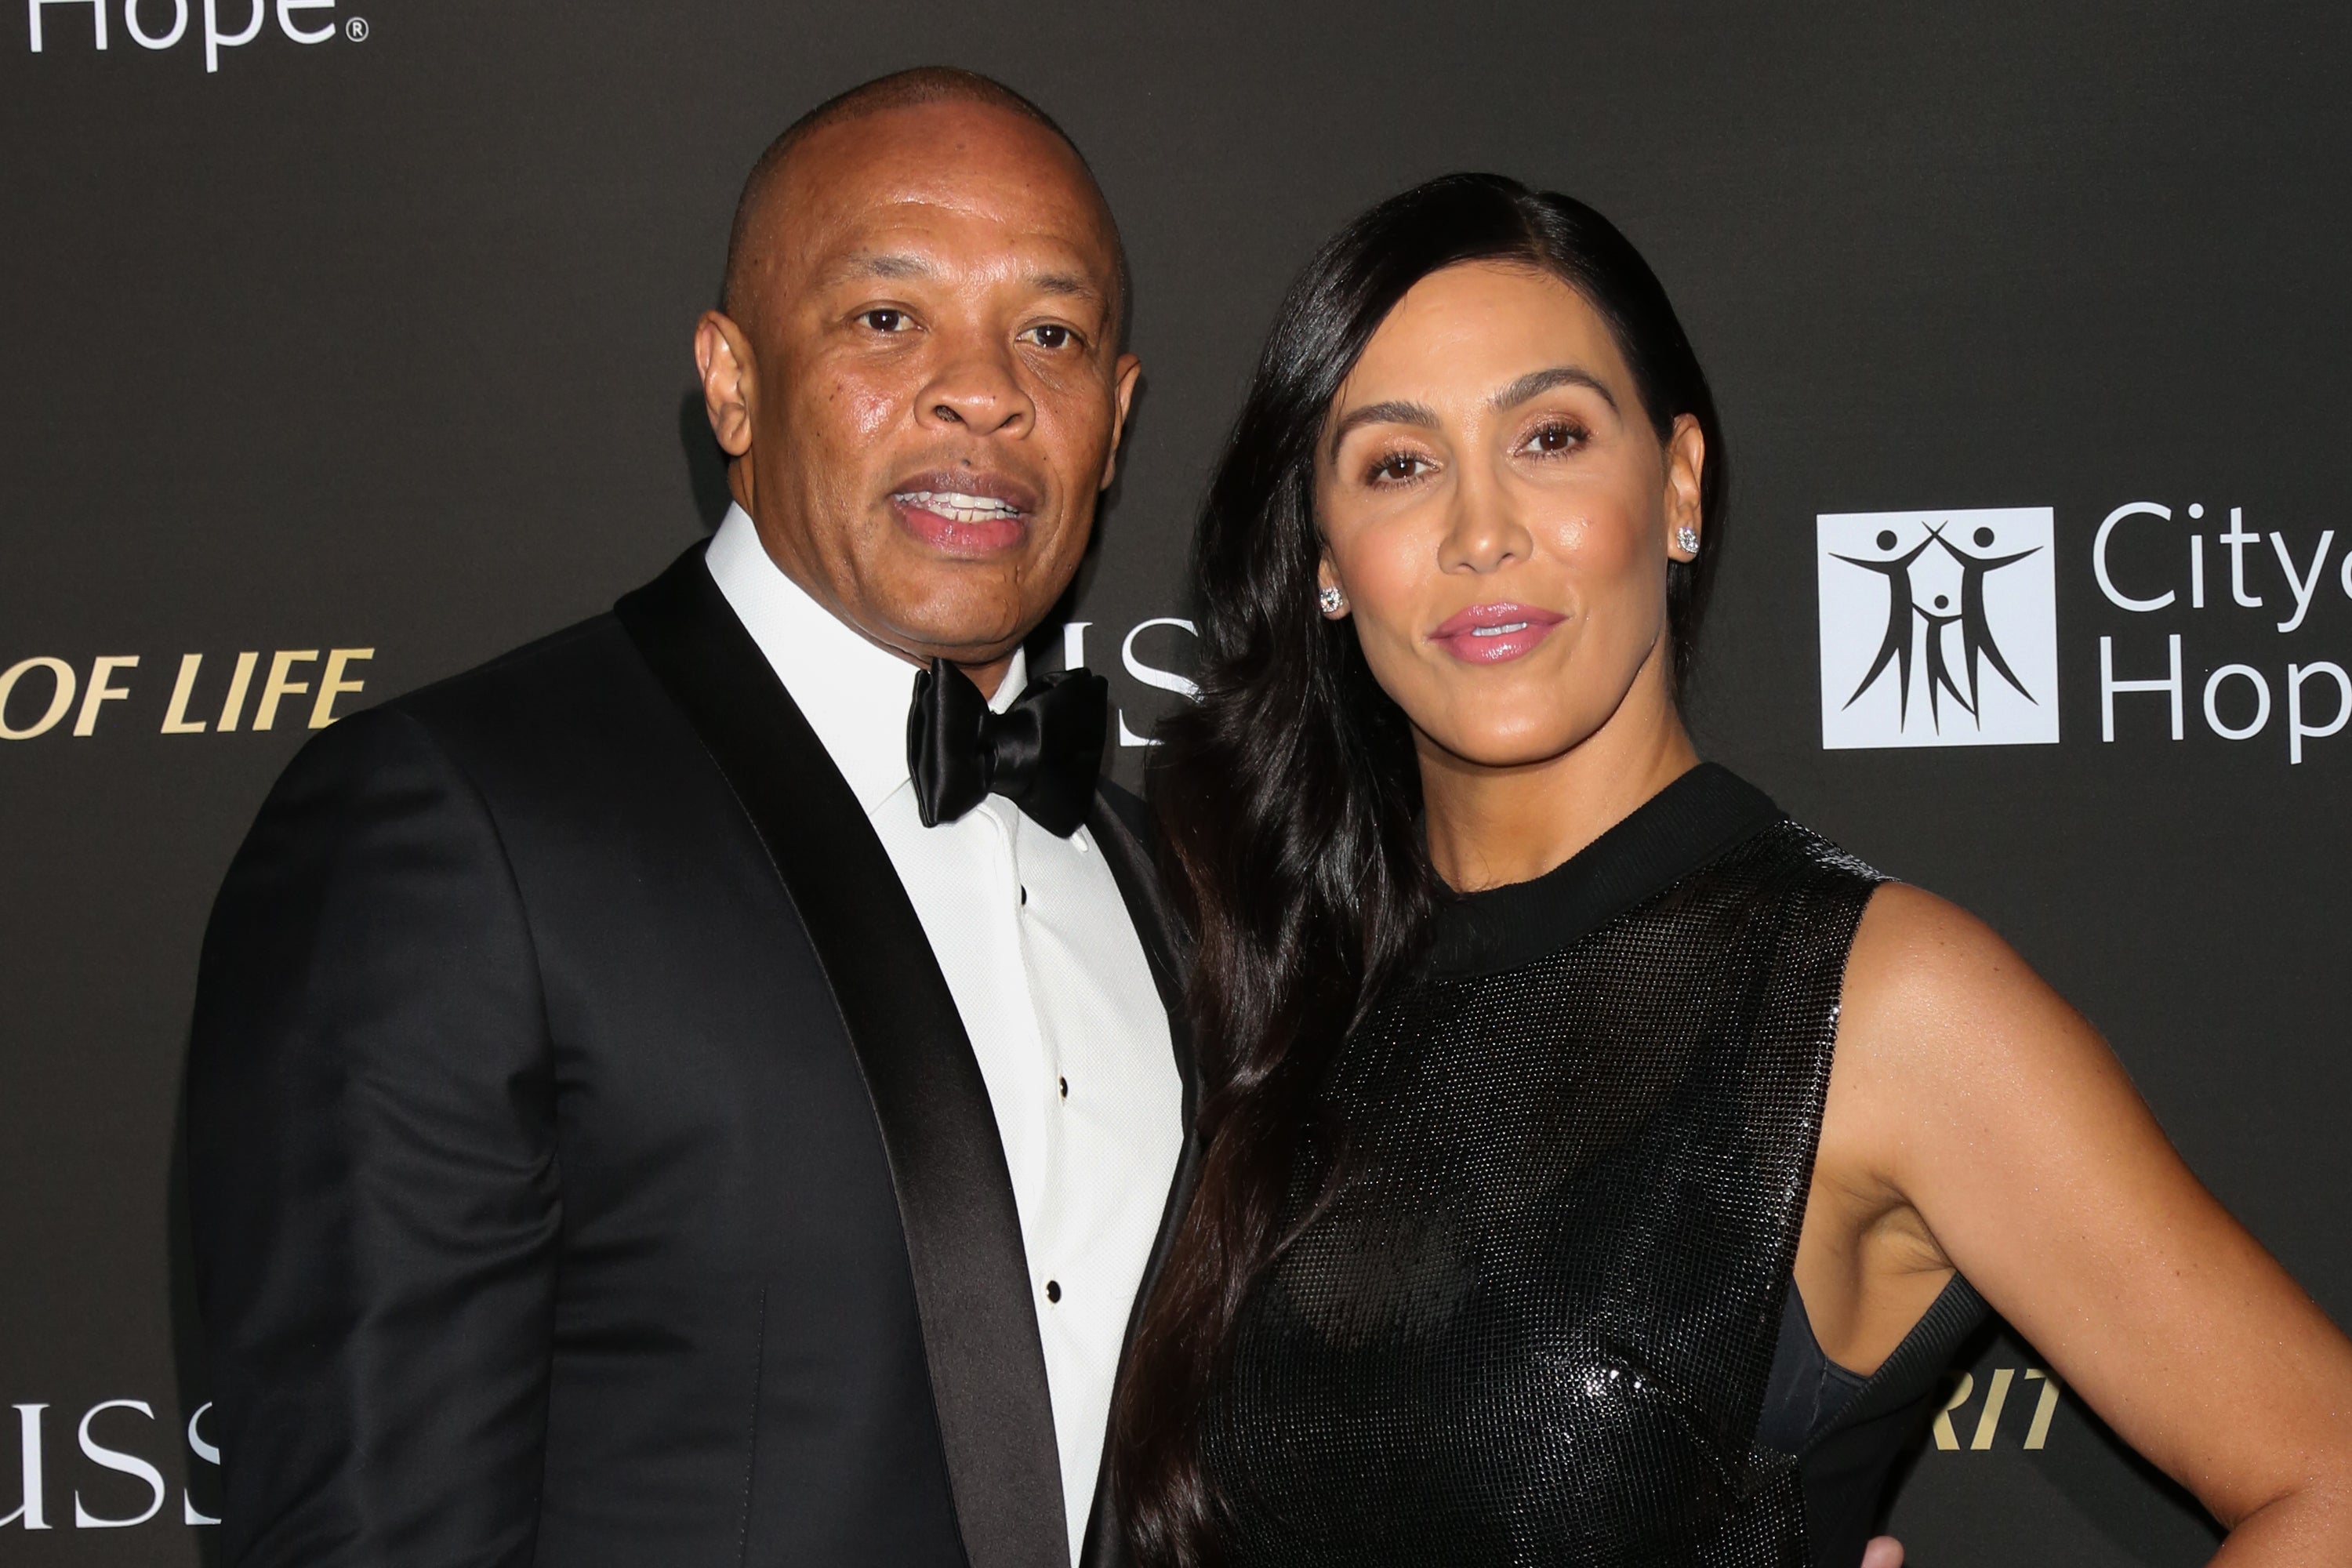 Dr Dre has to pay his ex-wife $100 million dollars - That's a lot of money